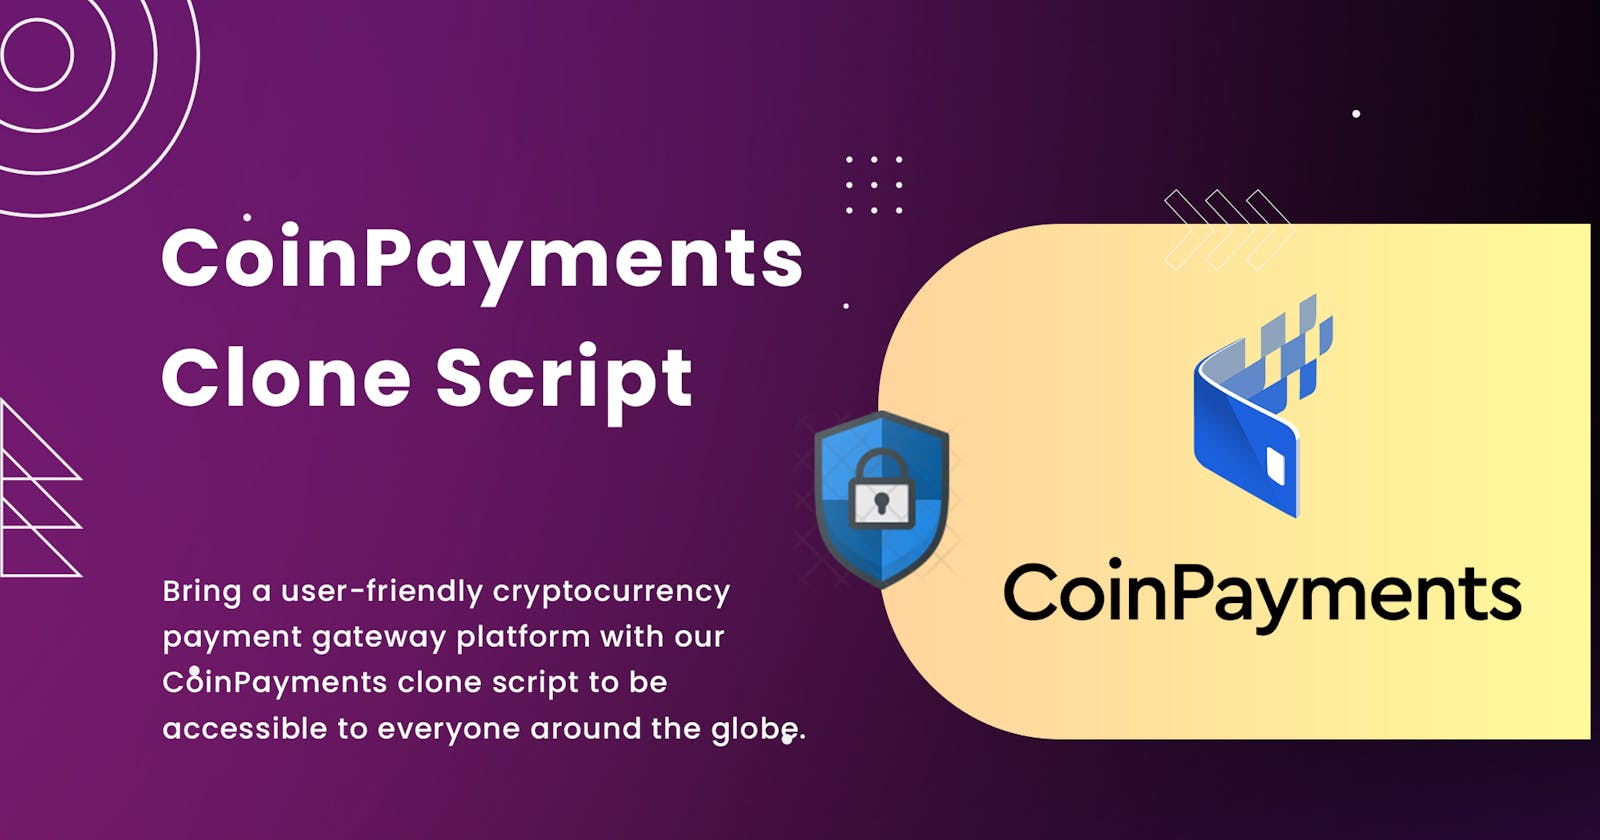 What is a CoinPayments Clone Script?